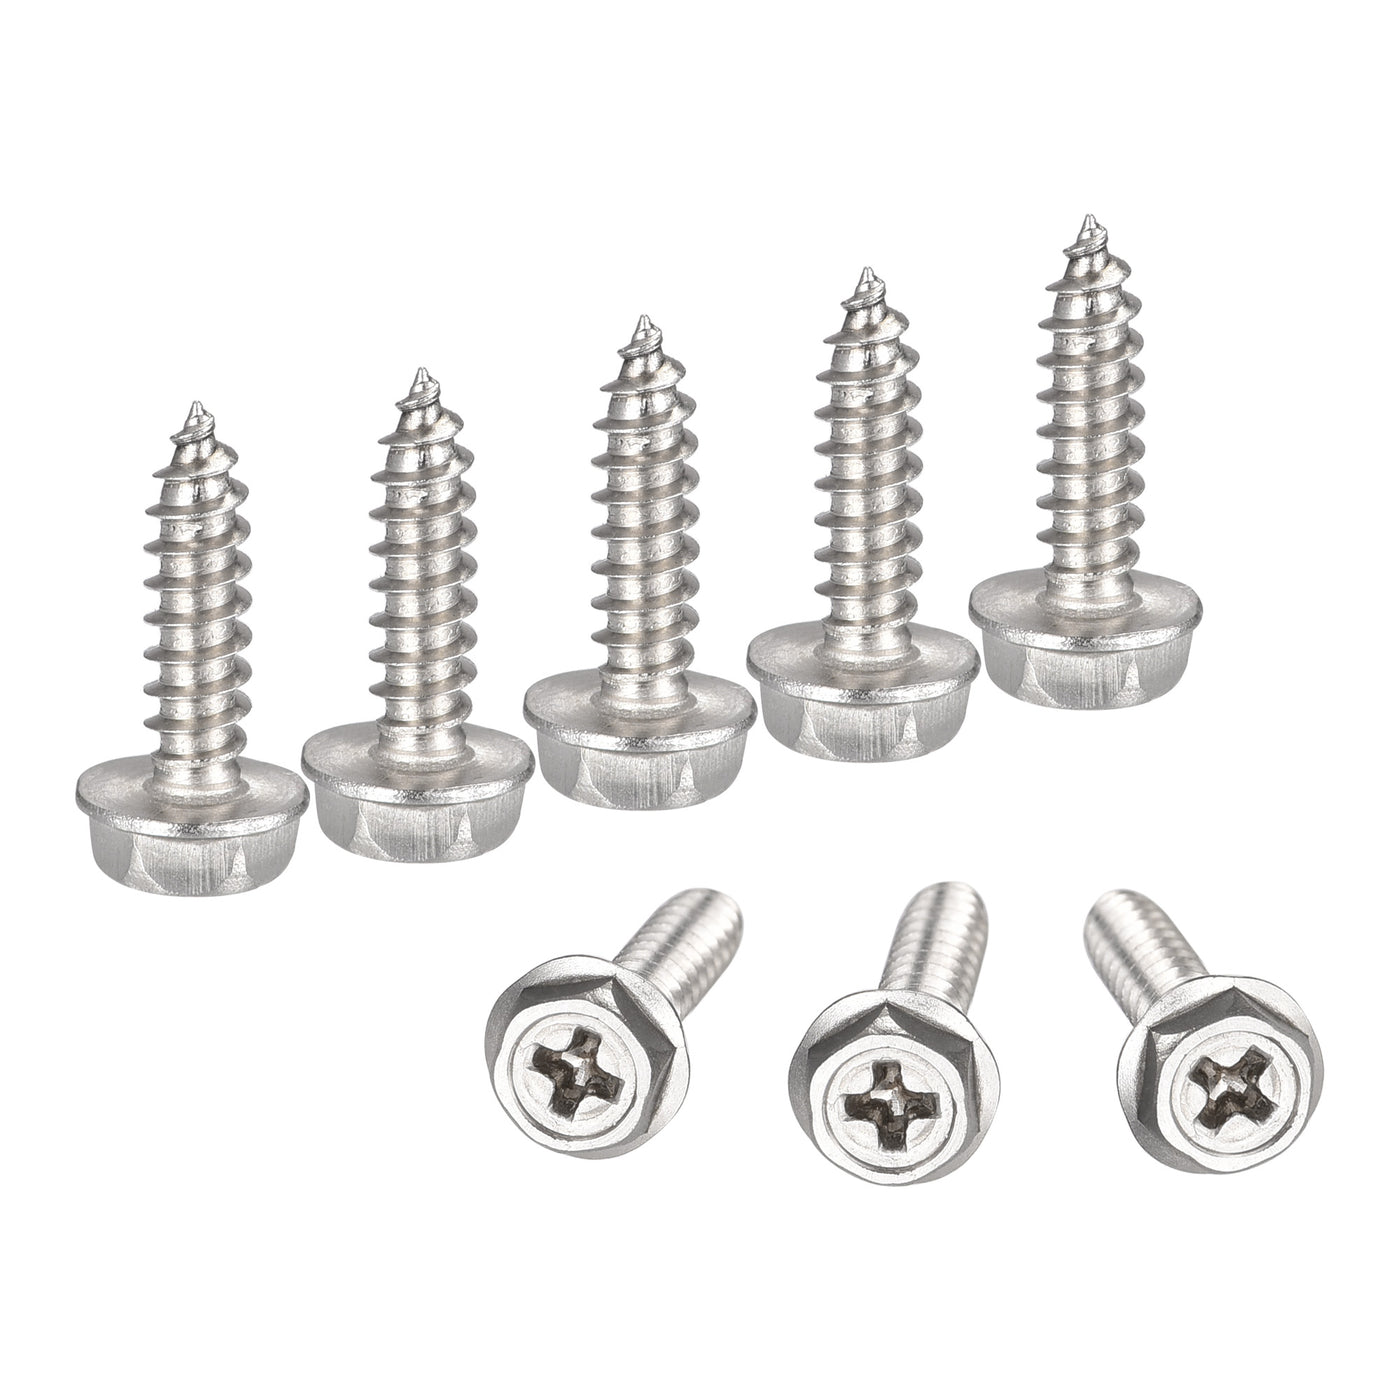 uxcell Uxcell Phillips Hex Washer Self Tapping Screws, M4 x 16mm 304 Stainless Steel Hex Flange Sheet Metal Screw 100pcs